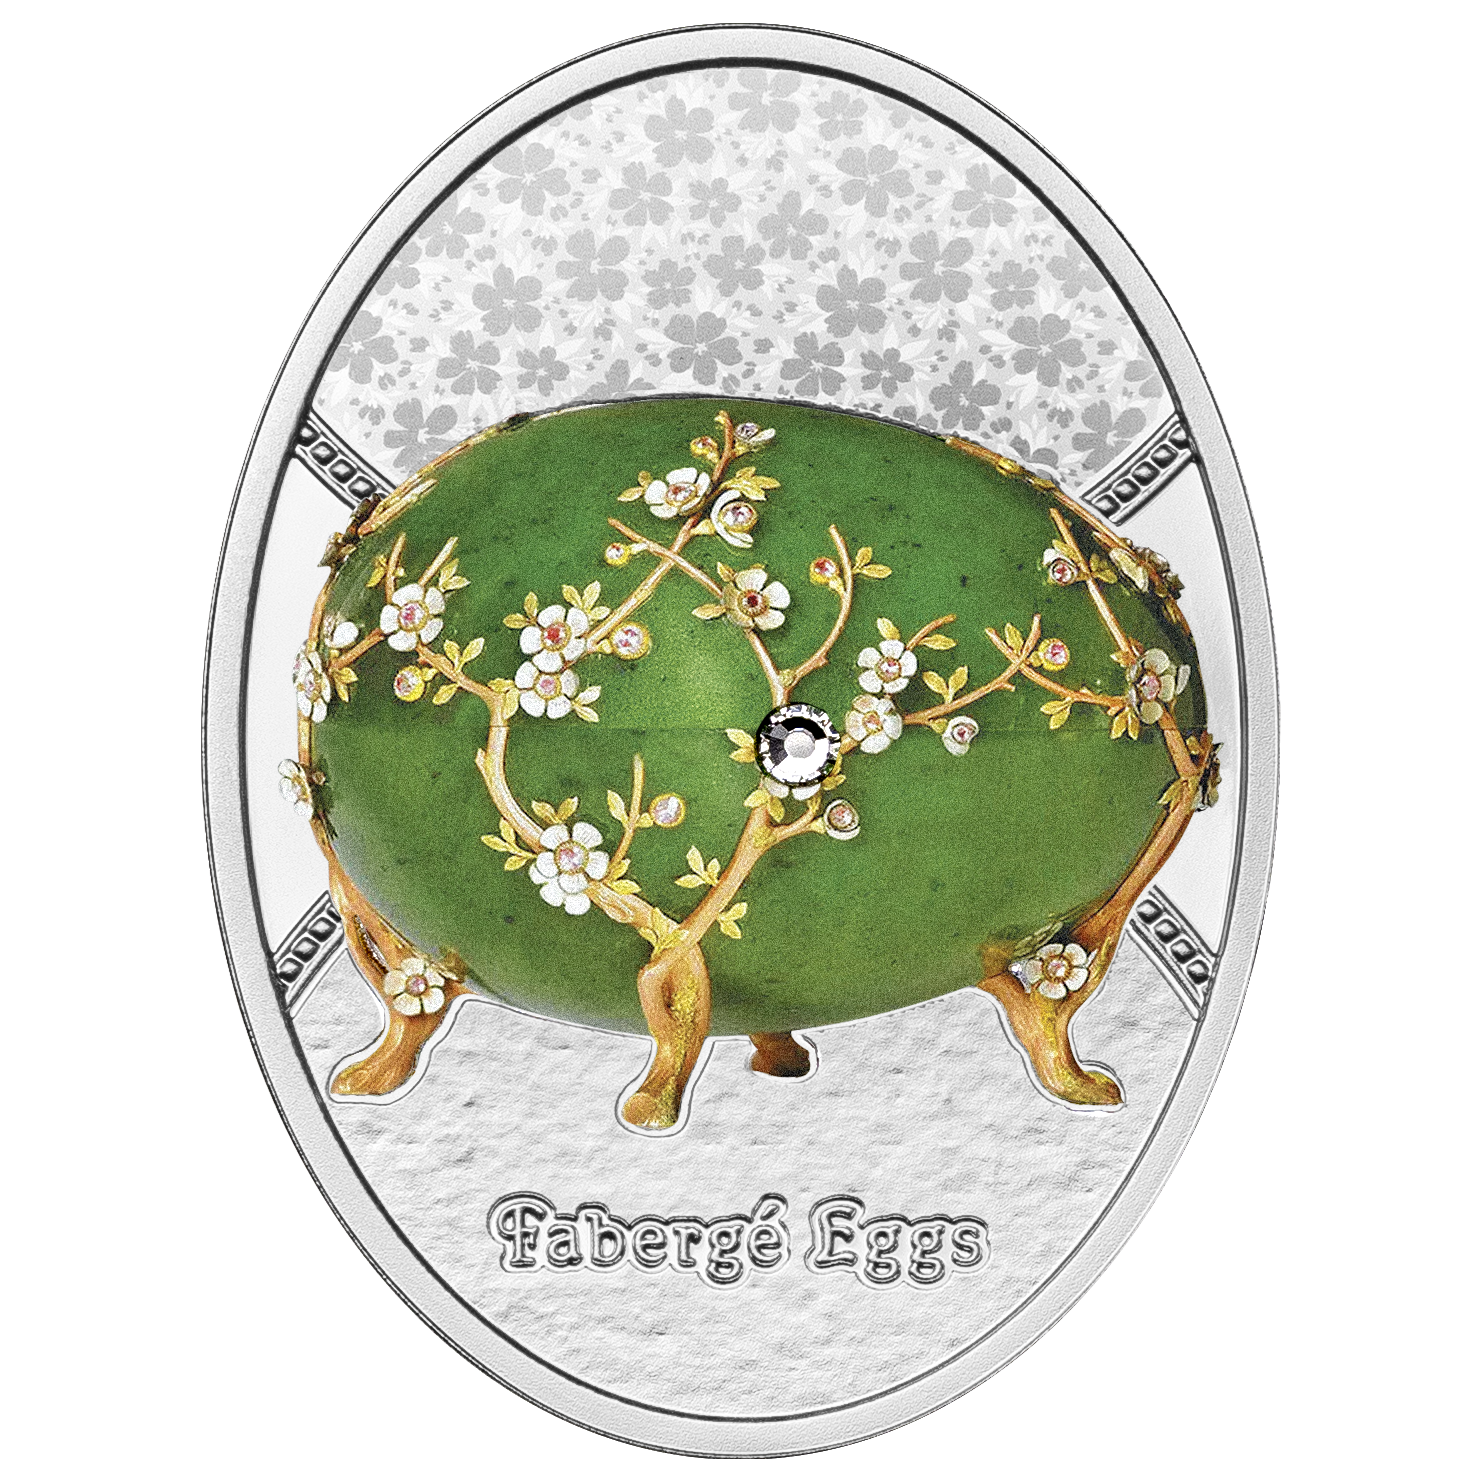 2024 Faberge Egg - The Apple Blossom 17.50g Silver Coin